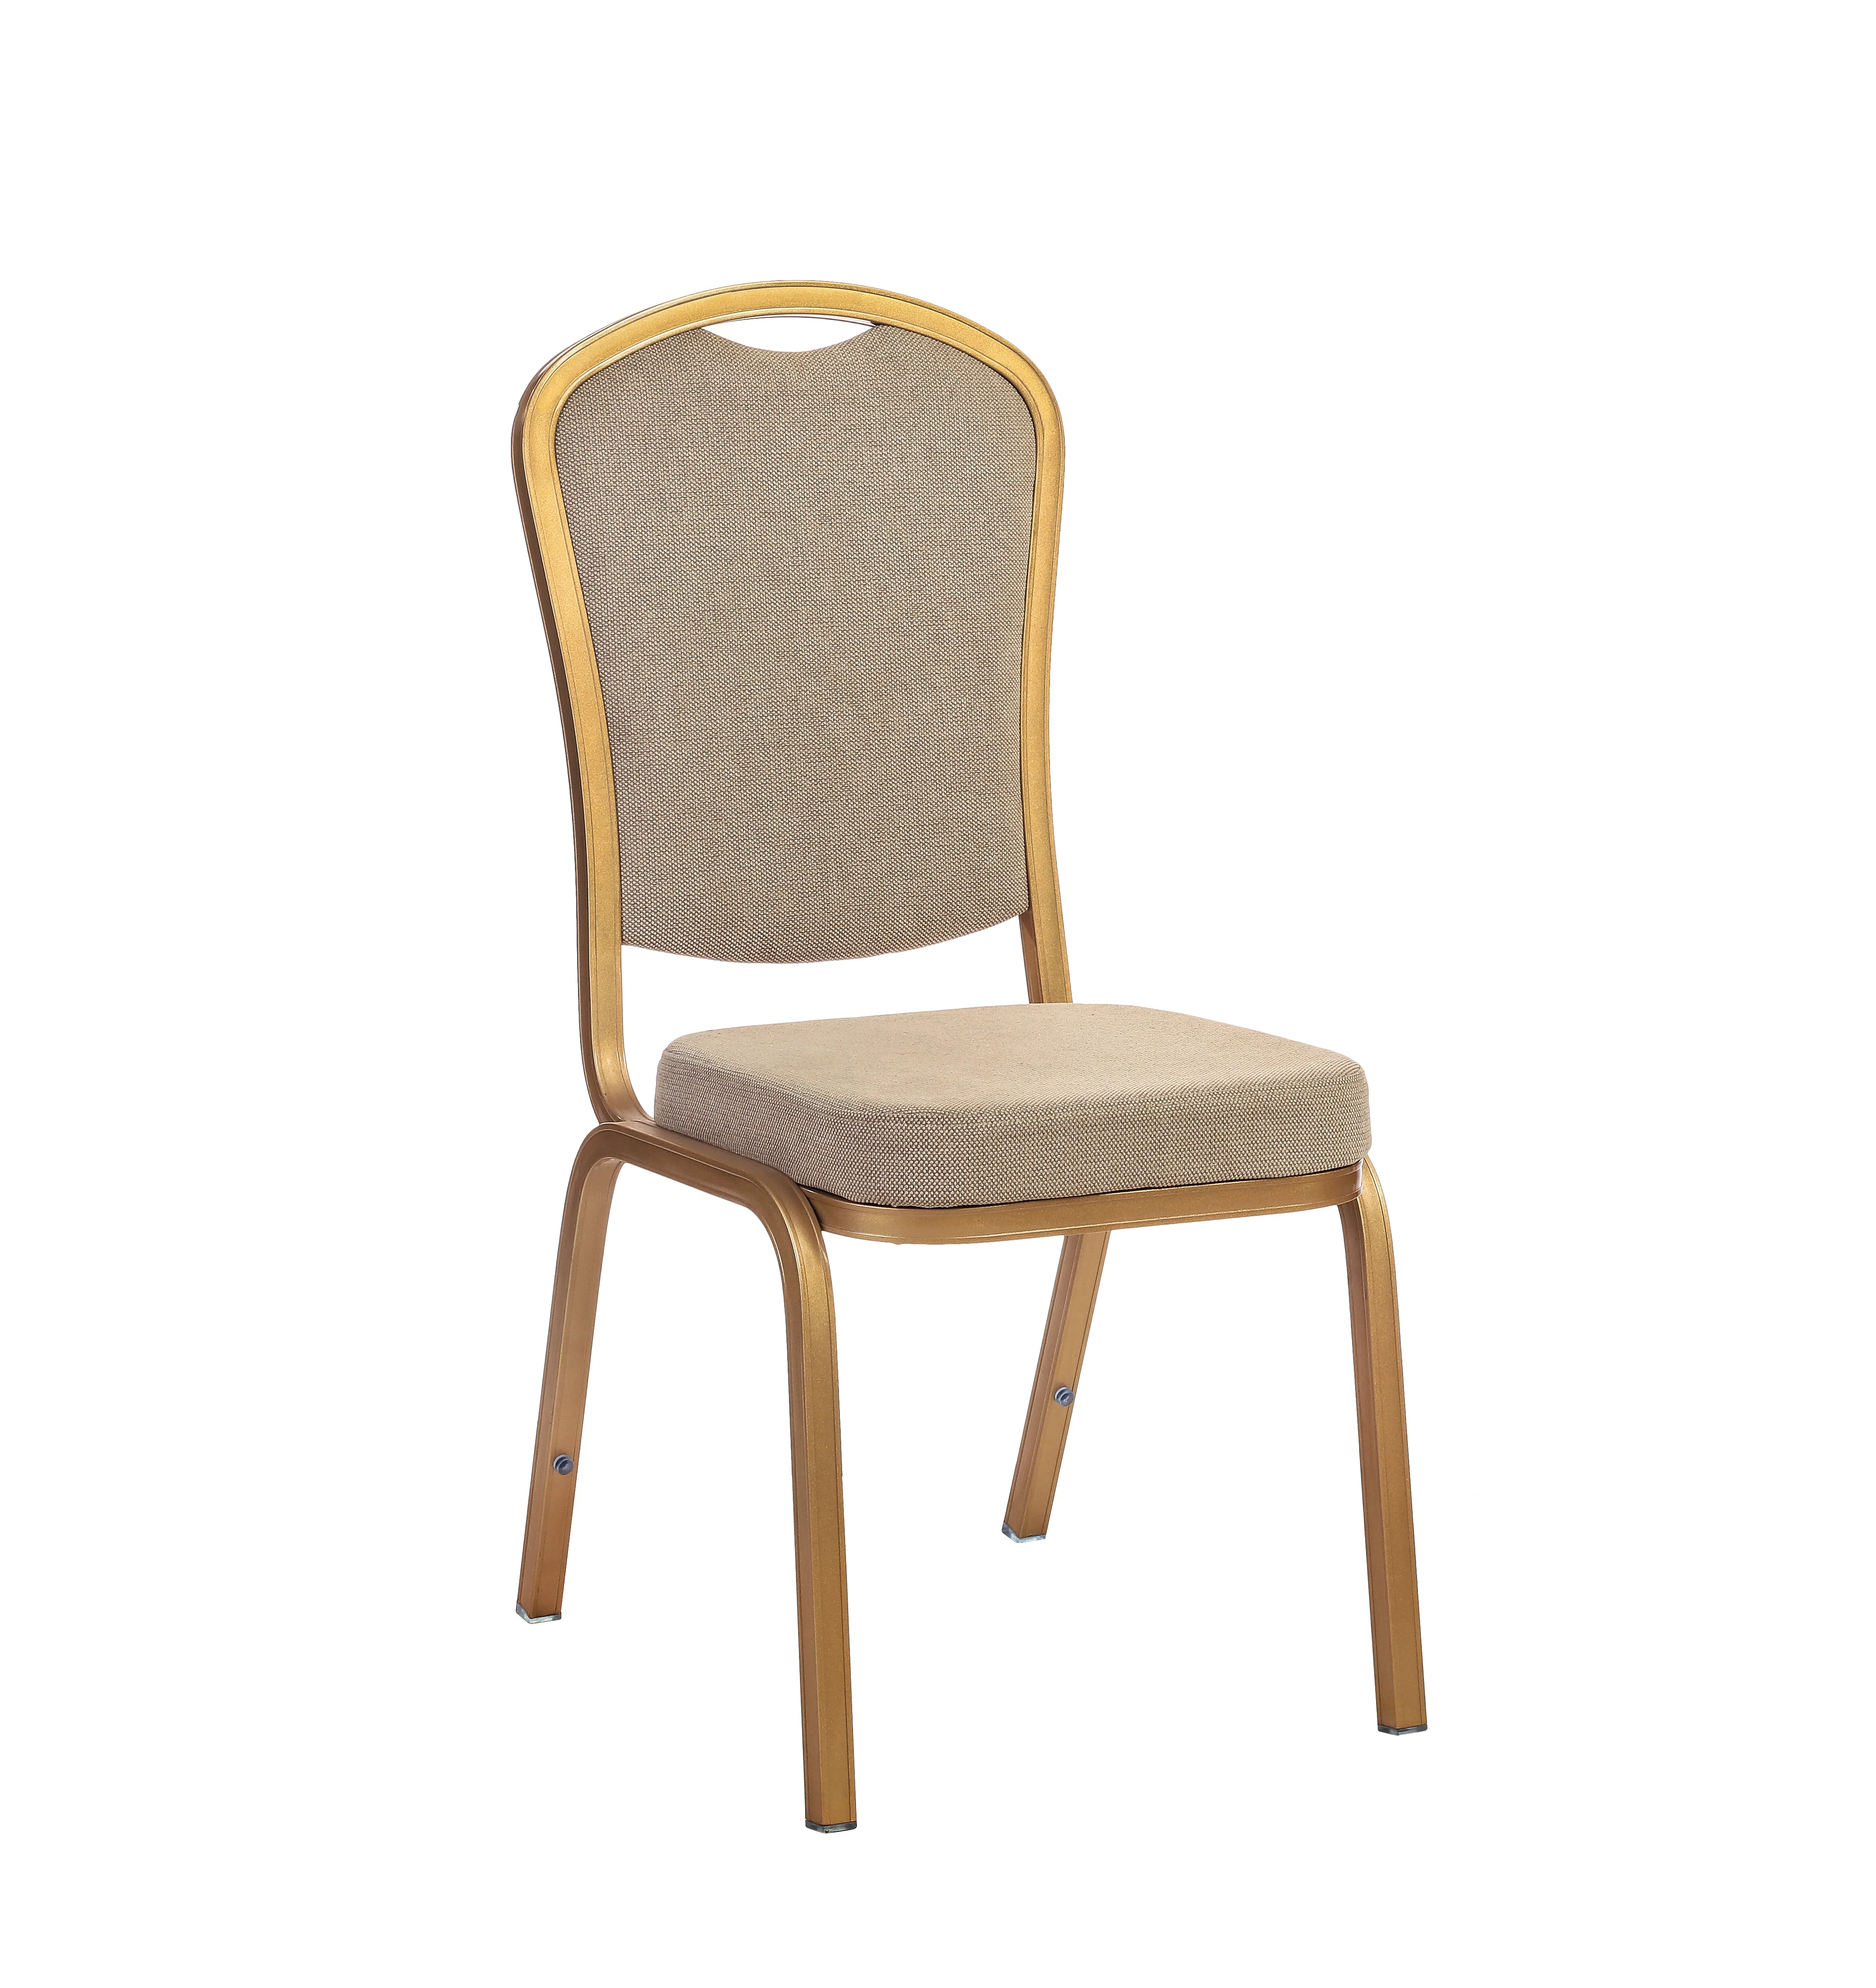 High Quality Stackable Wedding Chair Hotel Used Aluminium Stacking Chair Banquet Chair